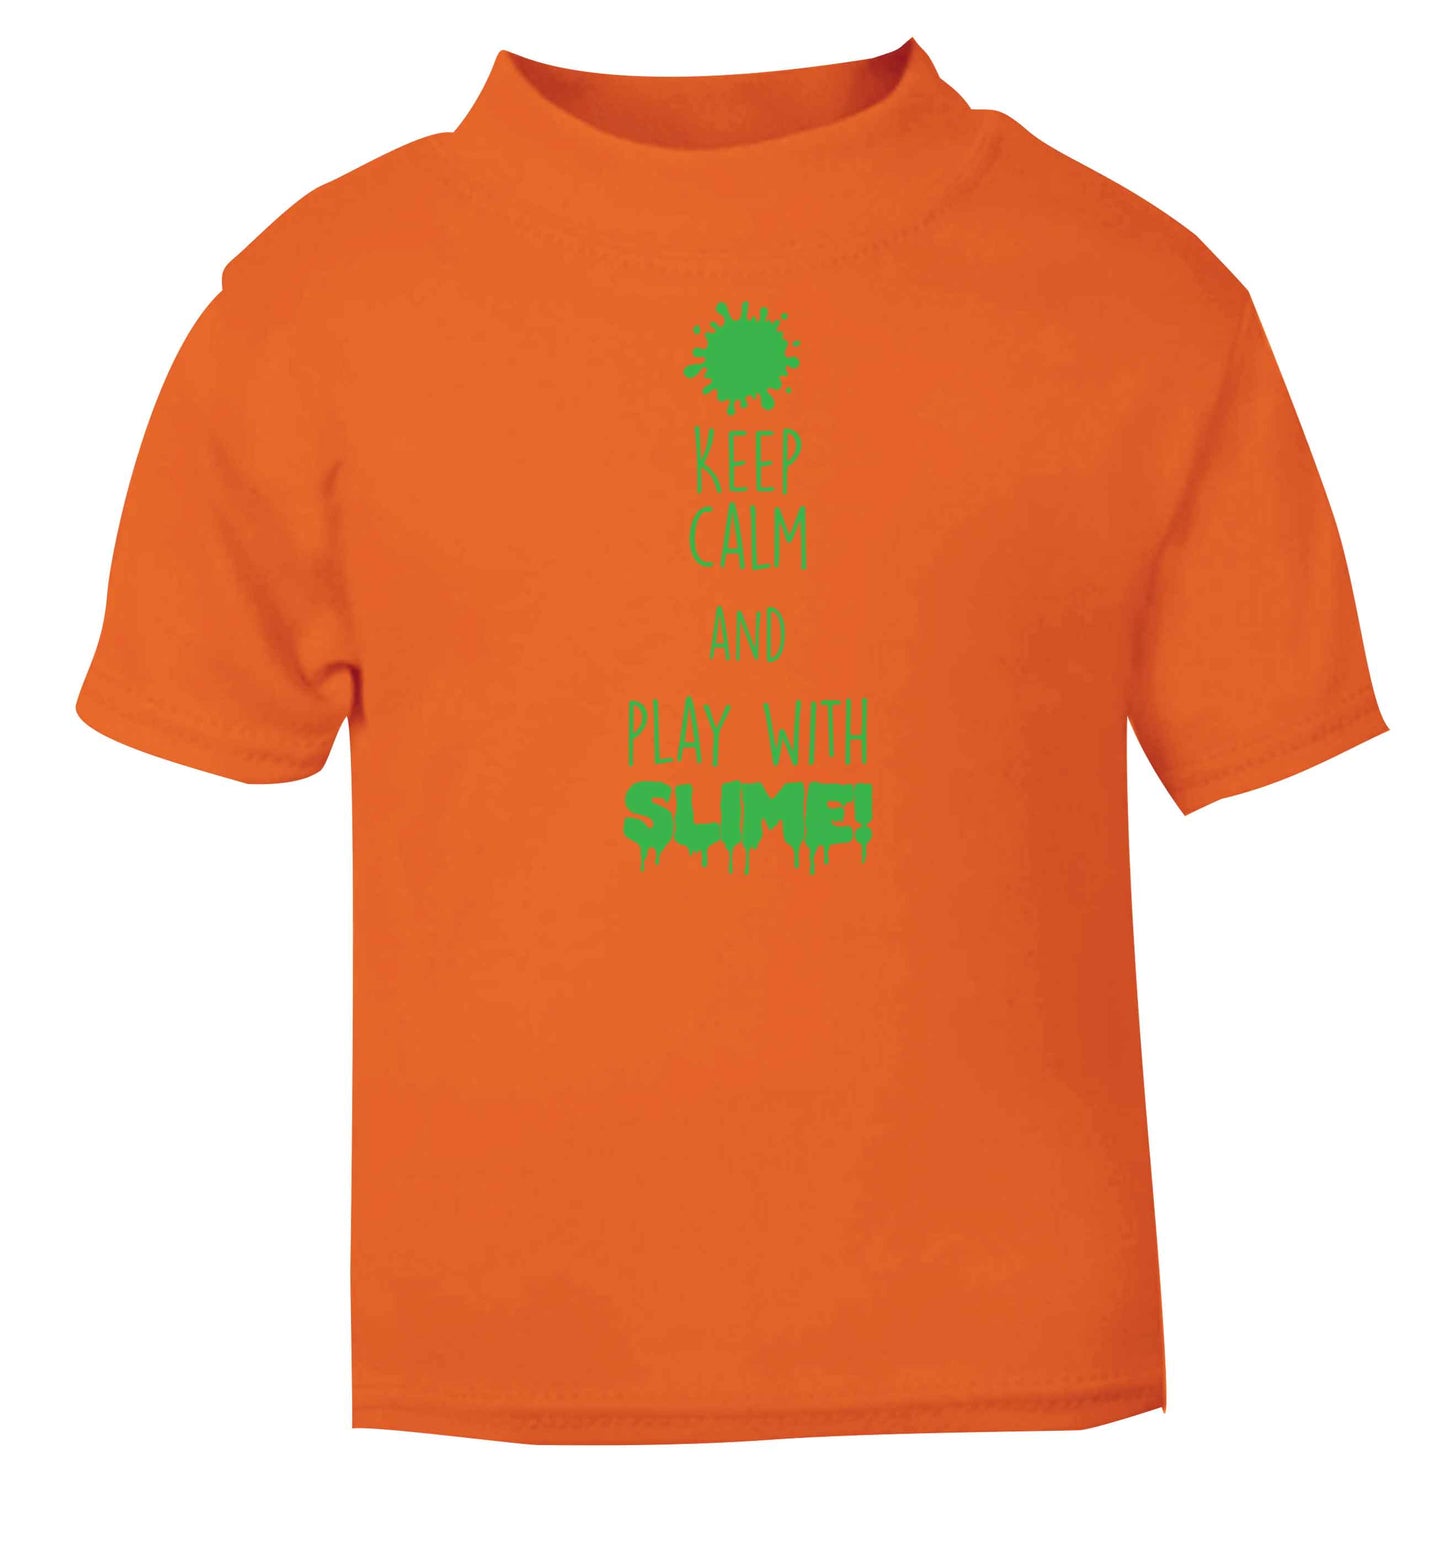 Neon green keep calm and play with slime!orange baby toddler Tshirt 2 Years